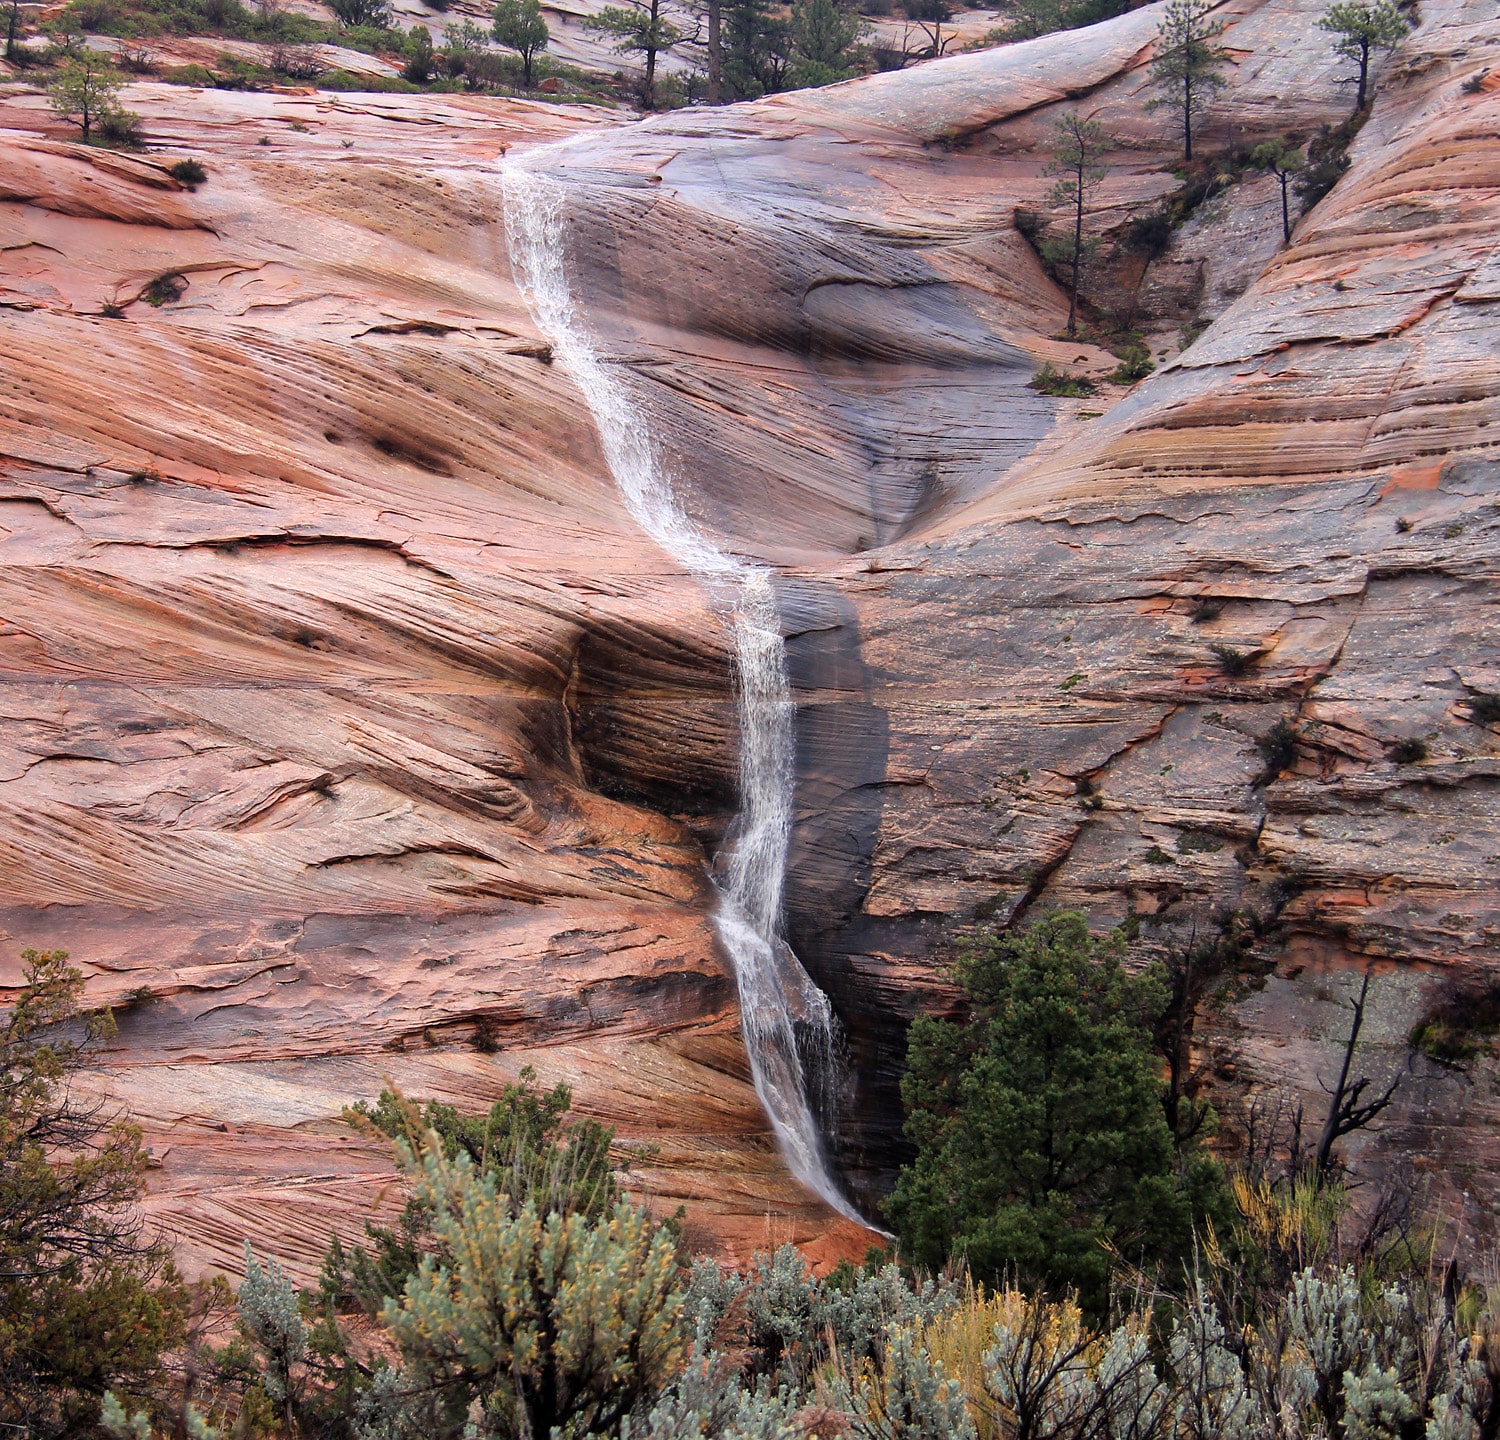 A waterfall courses over the rough surfaces of a sandstone formation in Zion National Park.